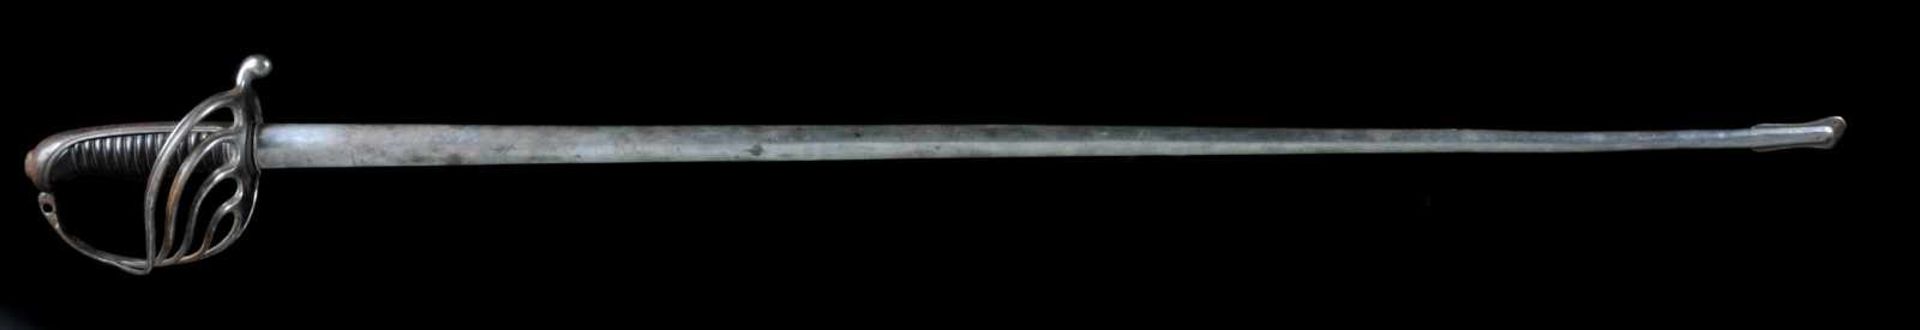 A FRENCH M1892 INFANTRY OFFICER’S SWORD IN SCABBARD, HILT WITH 6 BRANCHES BY COULAUX AND CIE, - Bild 2 aus 9